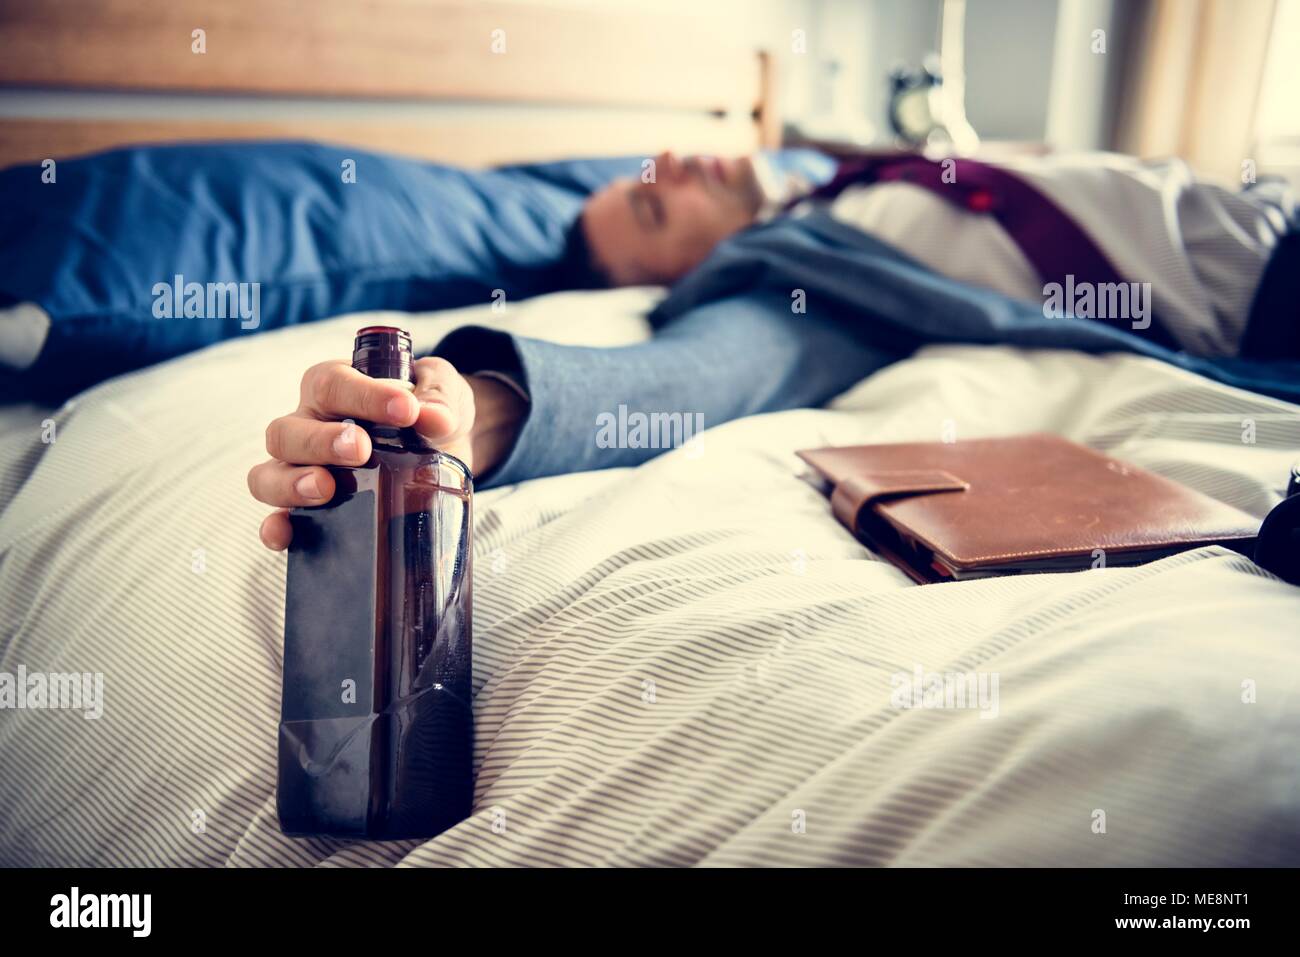 A drunk man passing out in bed Stock Photo